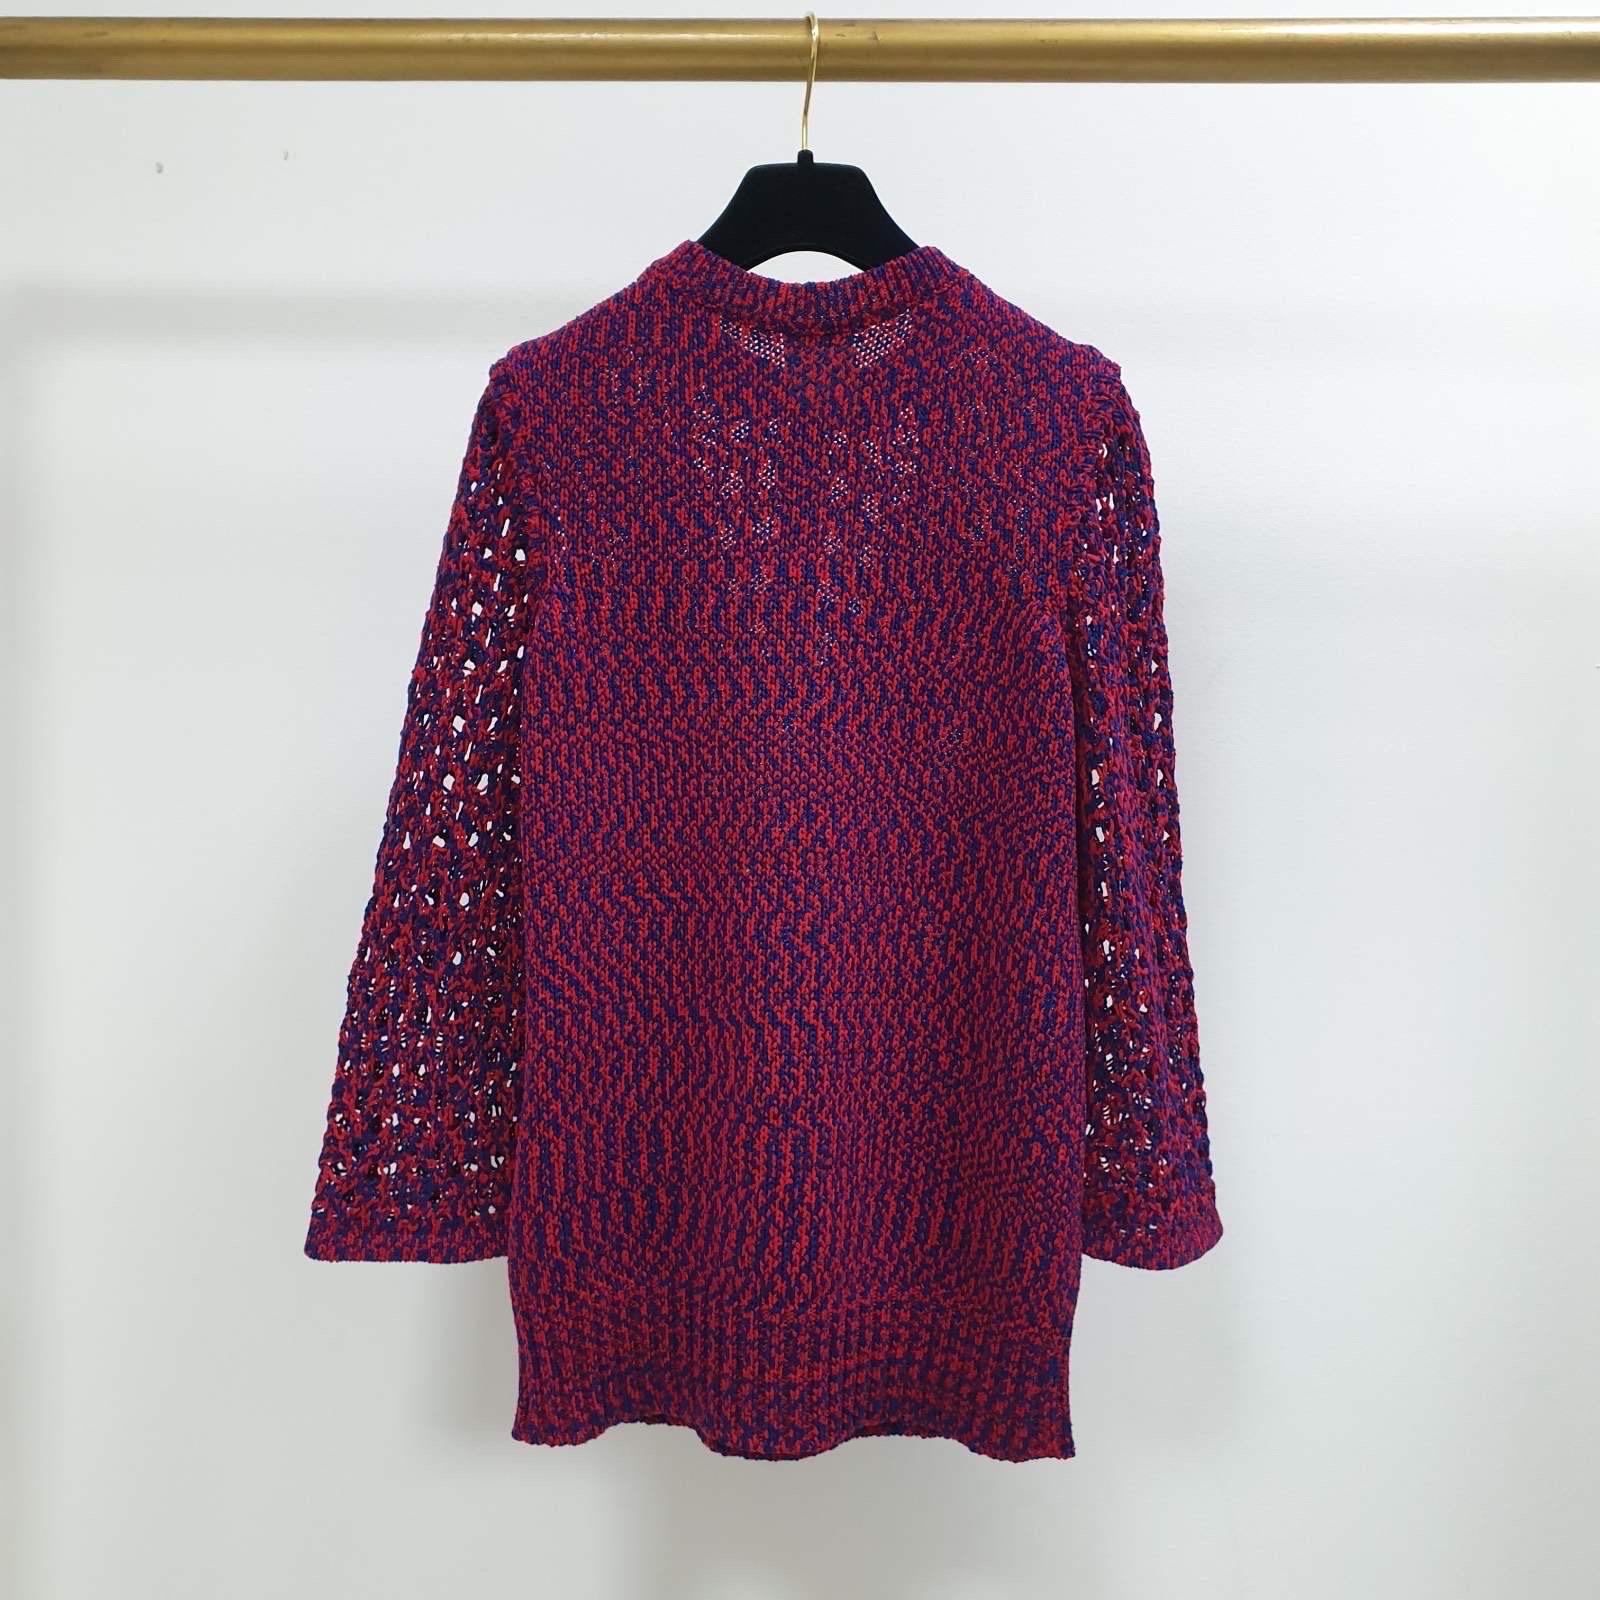 Chanel Keira Knightley Dress Sweater Tops  In Excellent Condition For Sale In Krakow, PL